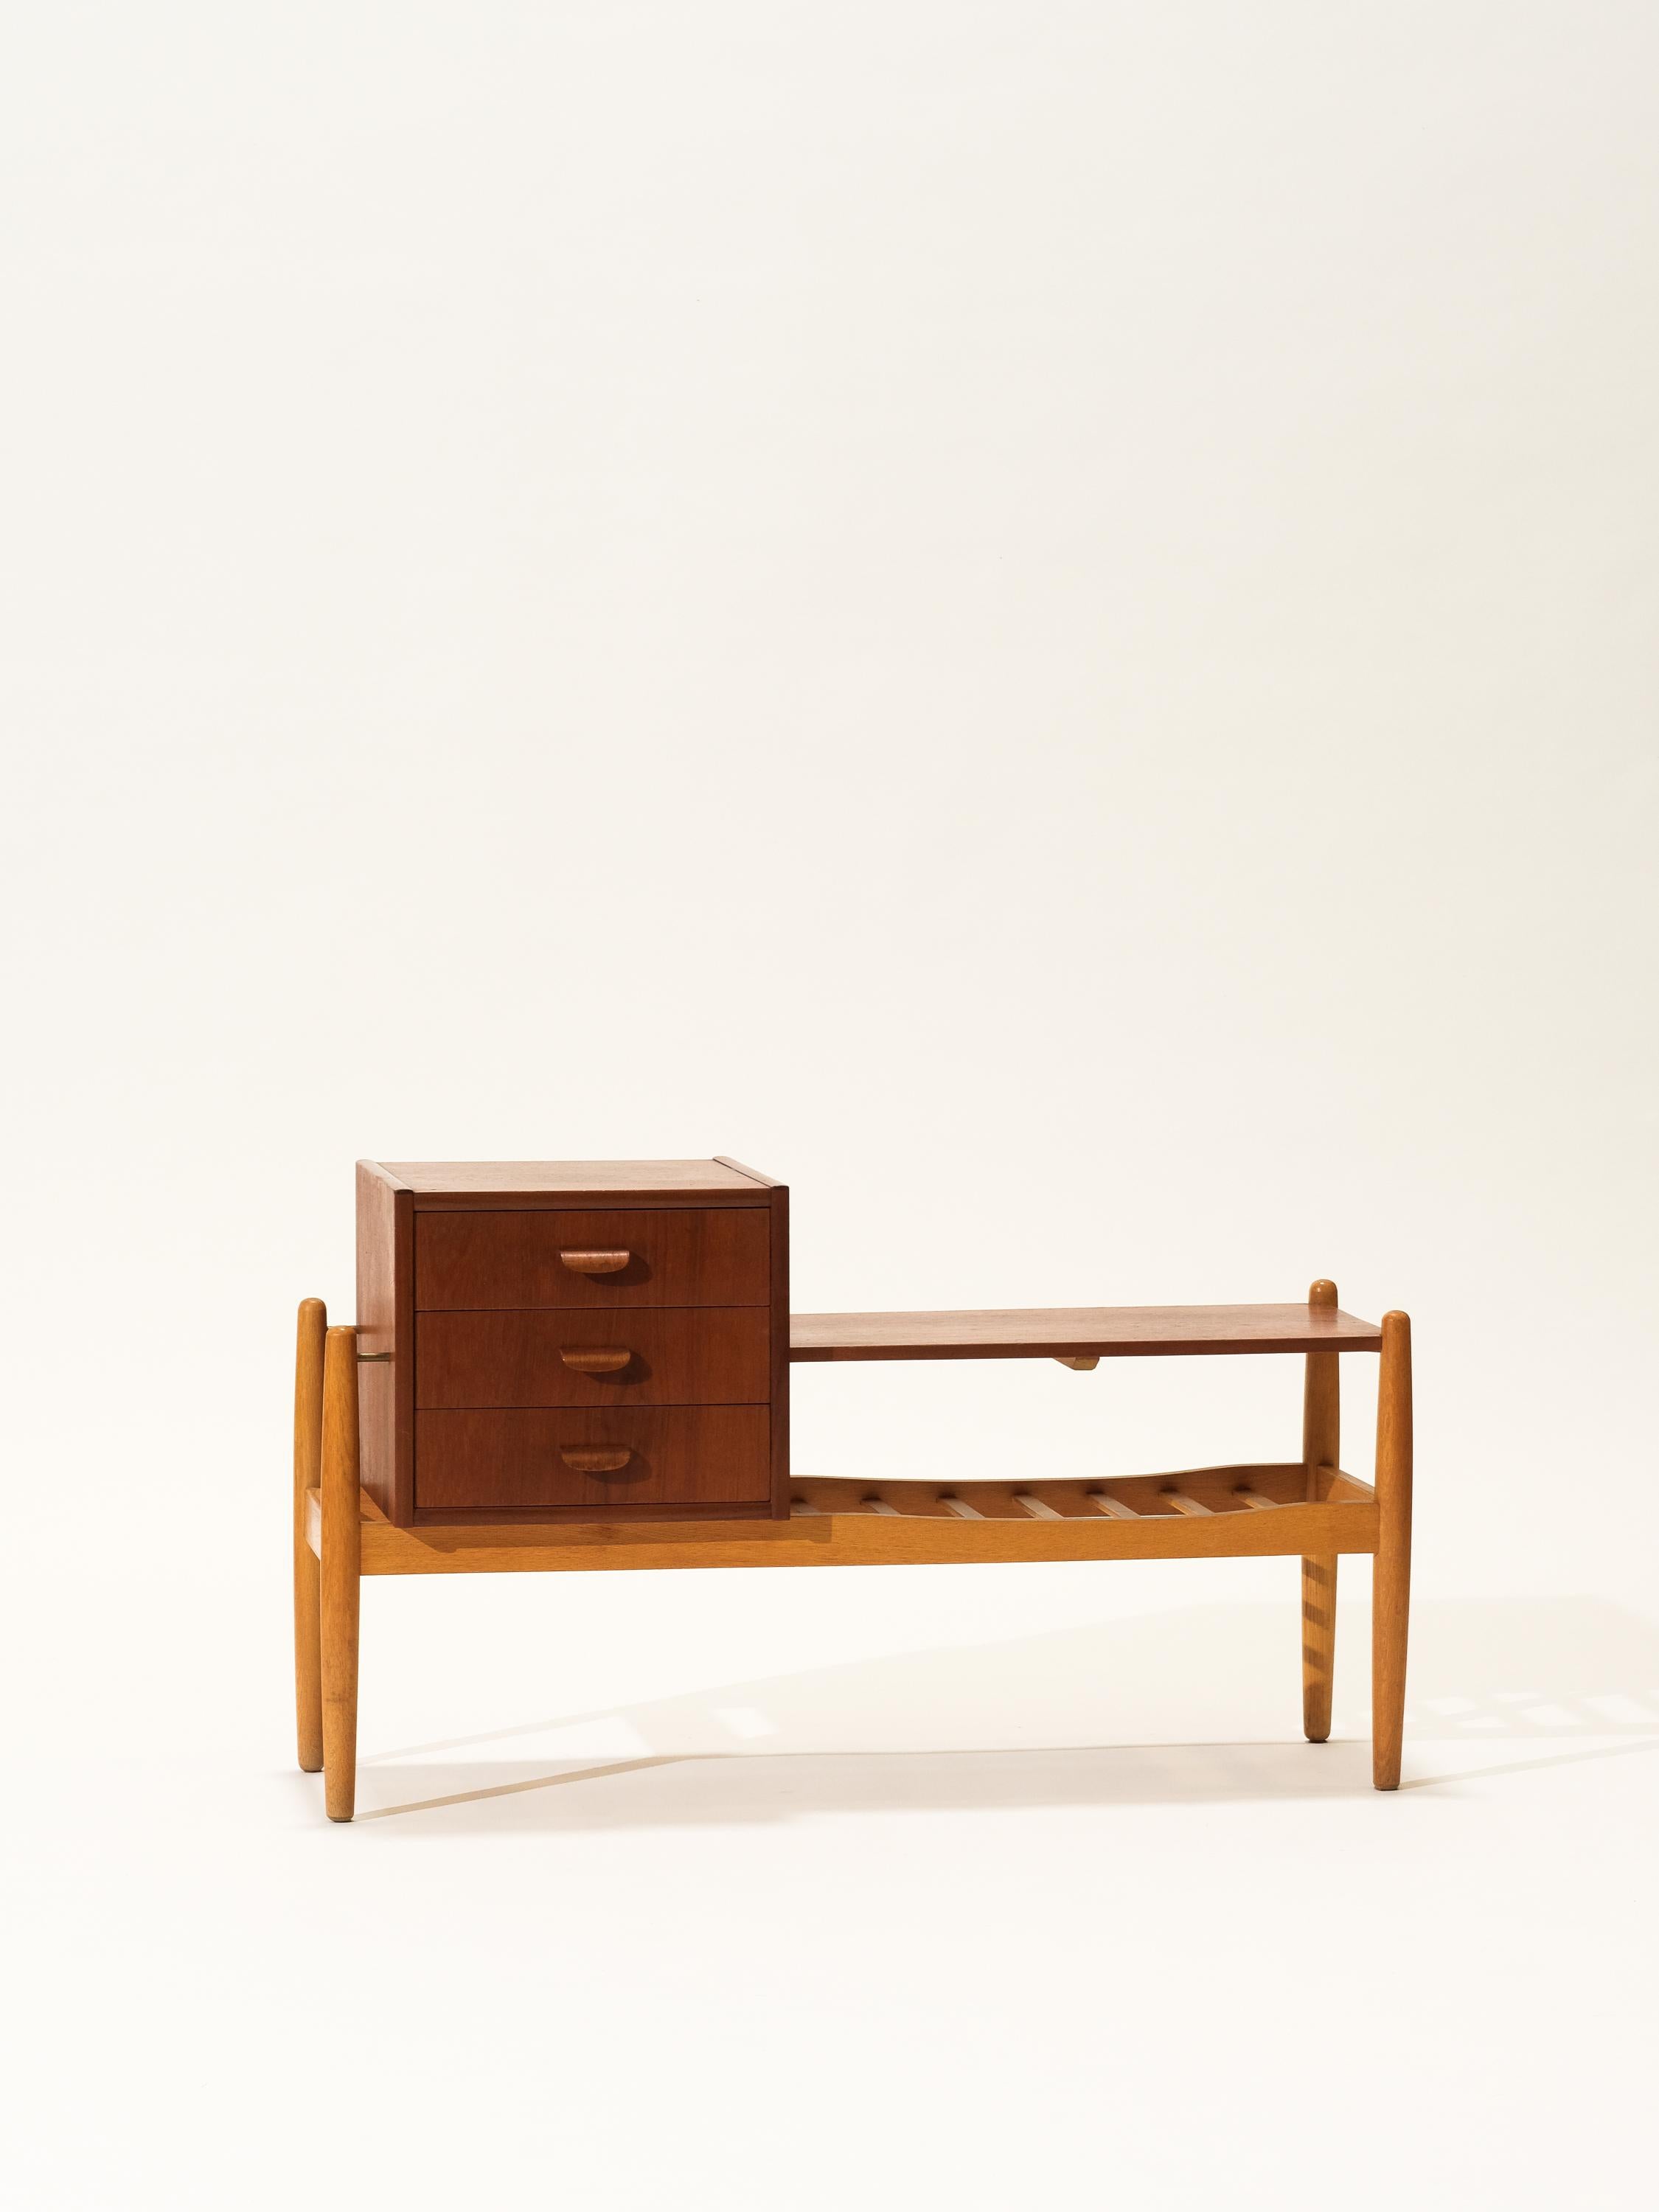 Small side or console table with a rack, a shelf and three drawers. Made of veneered teak and oak. Round tapered legs and brass details. Designed by Arne Wahl Iversen for Ikea. Great piece for the entrance or hallway.